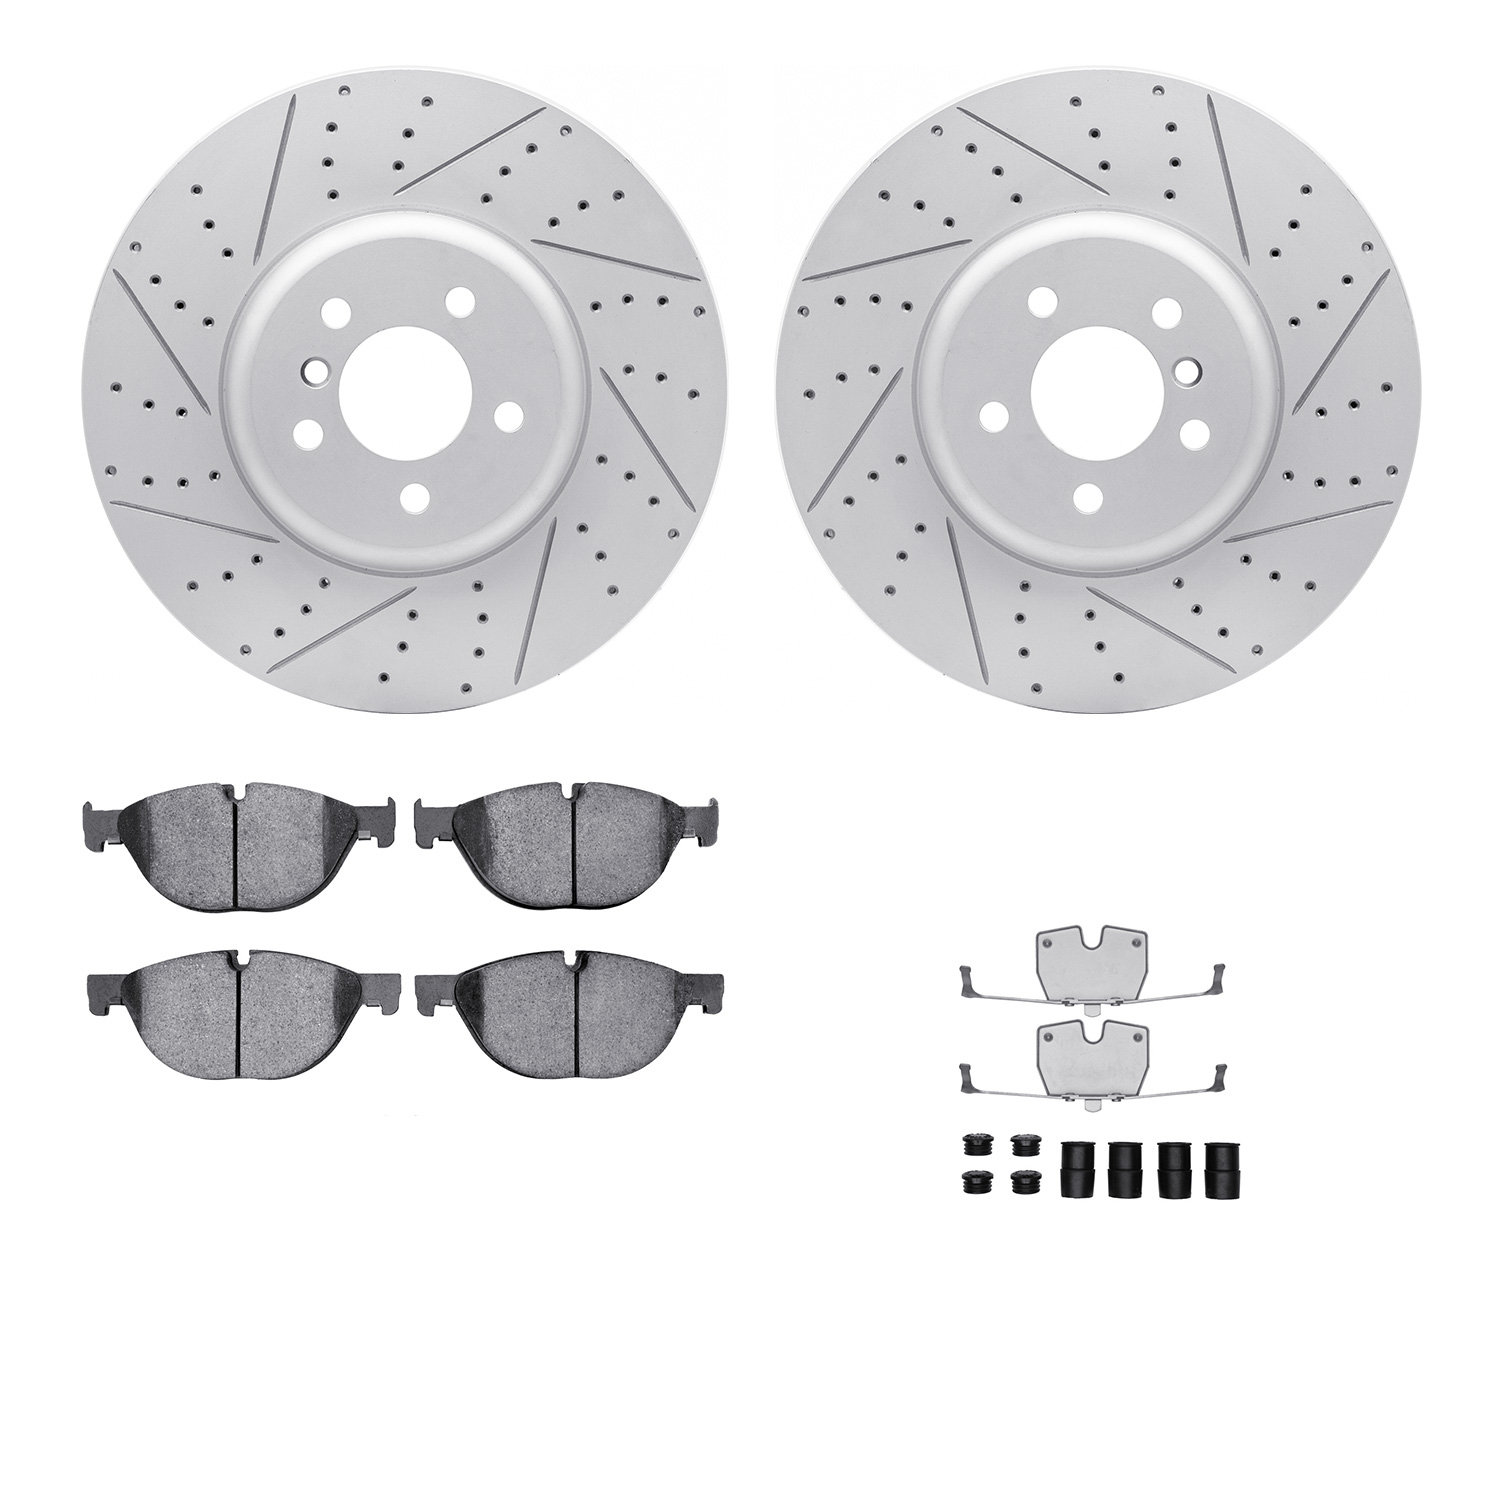 2512-31067 Geoperformance Drilled/Slotted Rotors w/5000 Advanced Brake Pads Kit & Hardware, 2009-2017 BMW, Position: Front